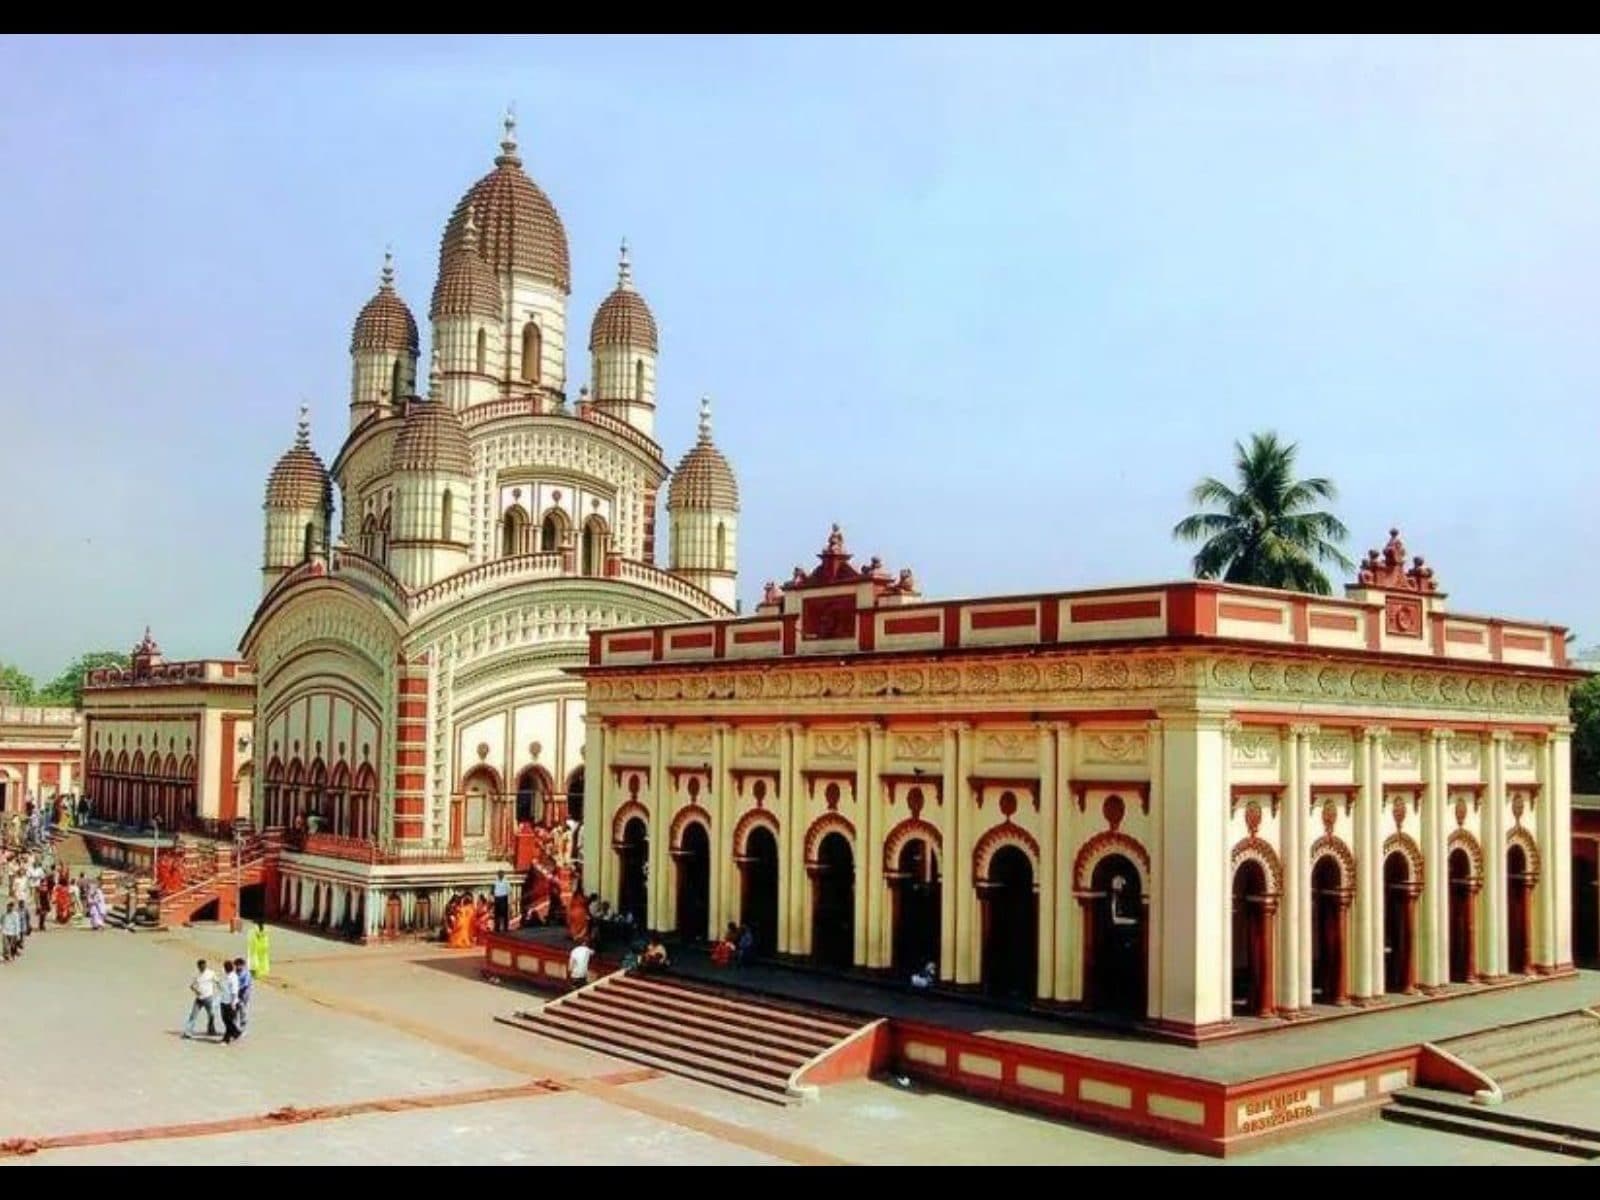 164 Dakshineswar Kali Temple Stock Photos HighRes Pictures and Images   Getty Images